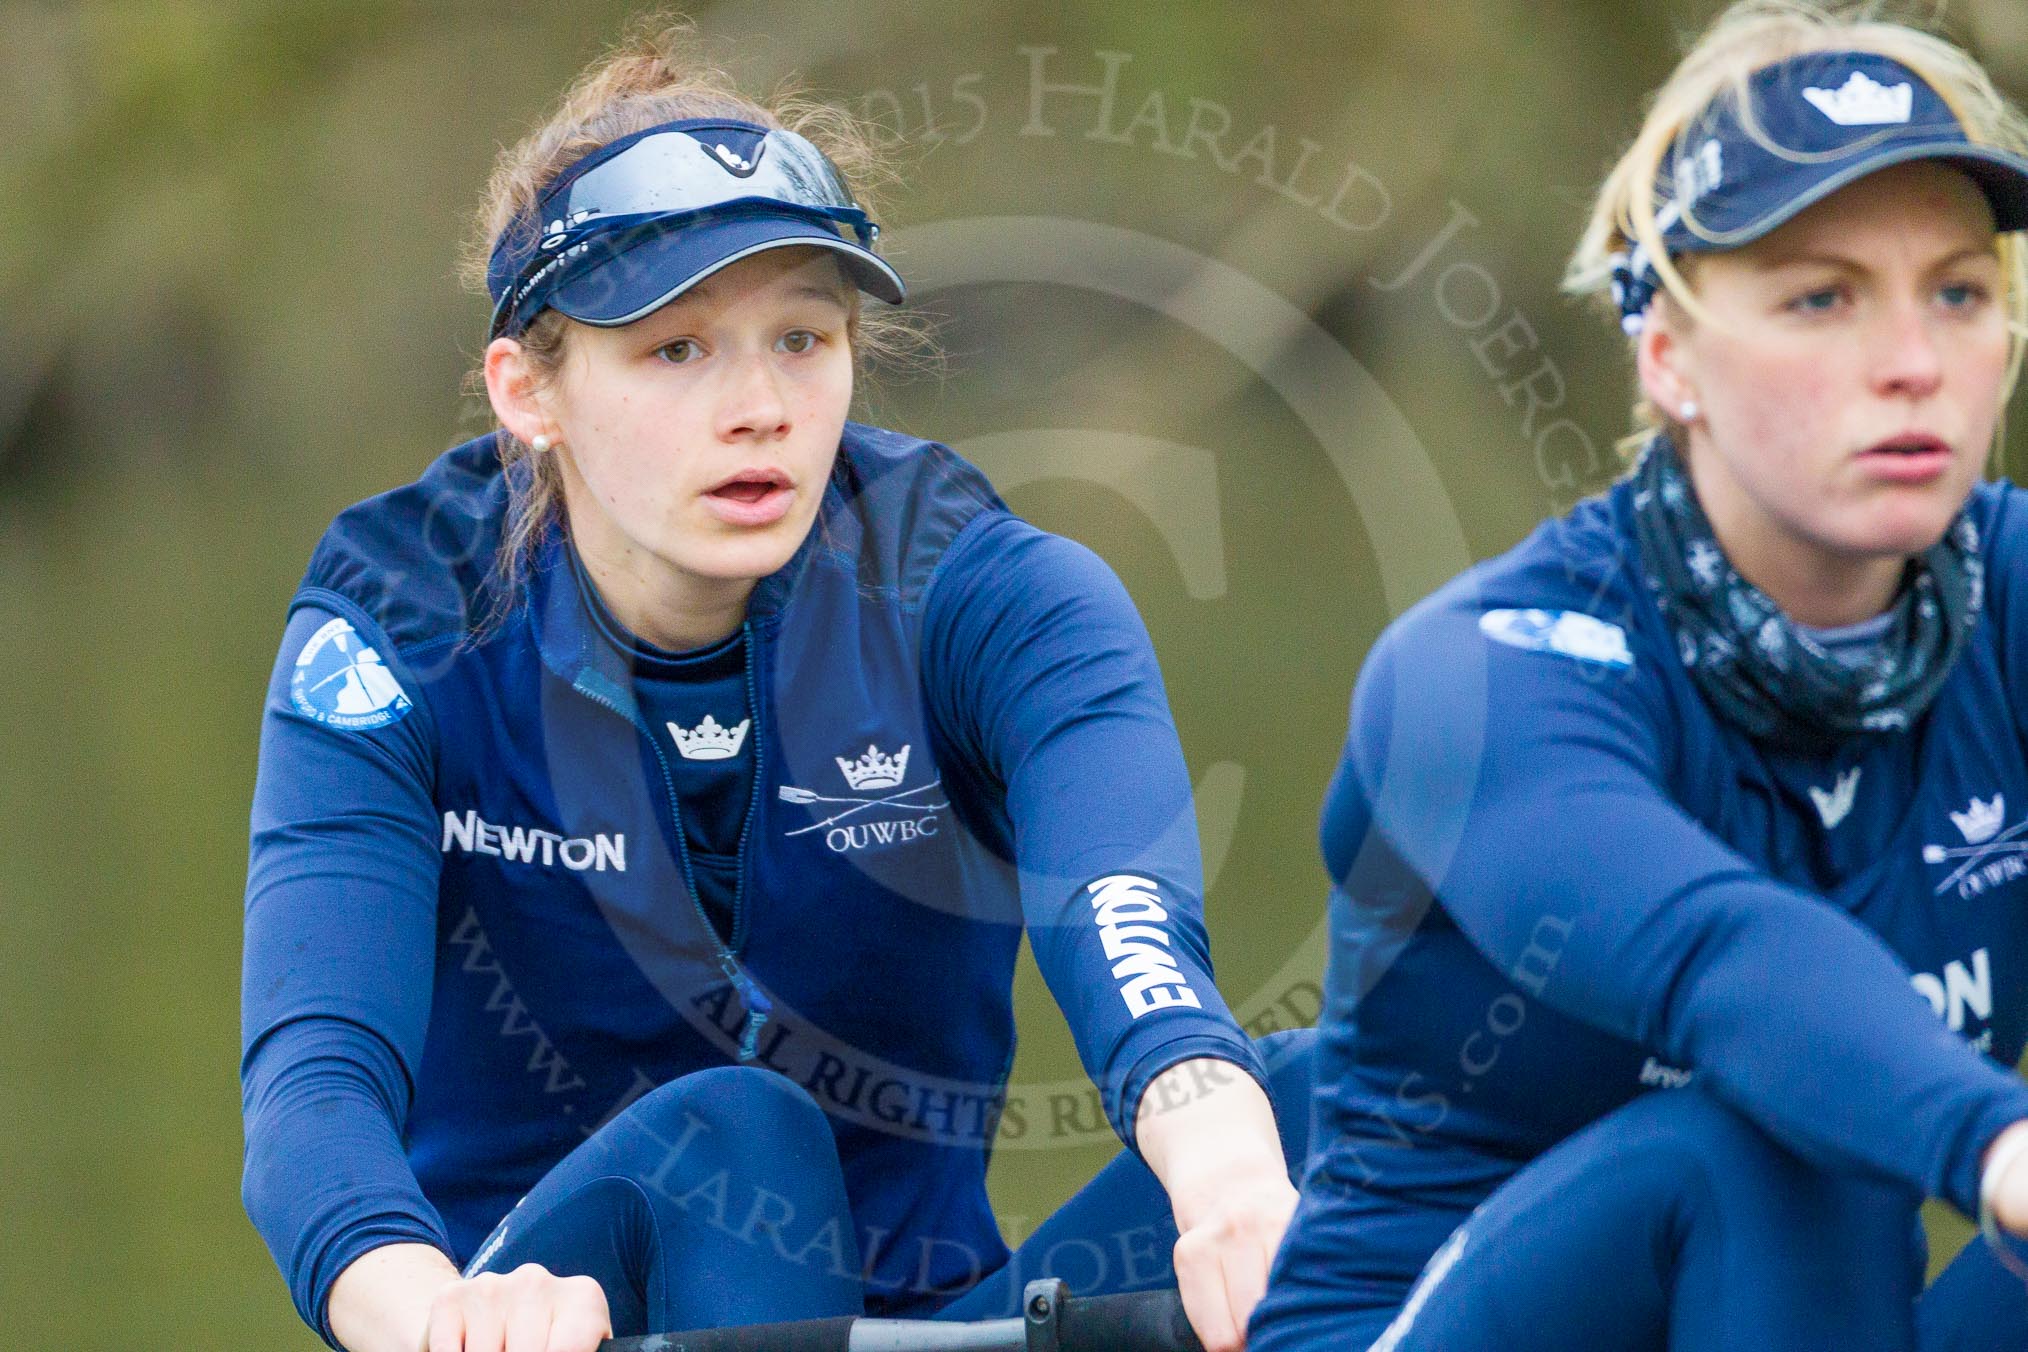 The Boat Race season 2016 - OUWBC training Wallingford: emma Lukasiewicz, bow in the OUWBC Blue Boat.
River Thames,
Wallingford,
Oxfordshire,

on 29 February 2016 at 16:28, image #108